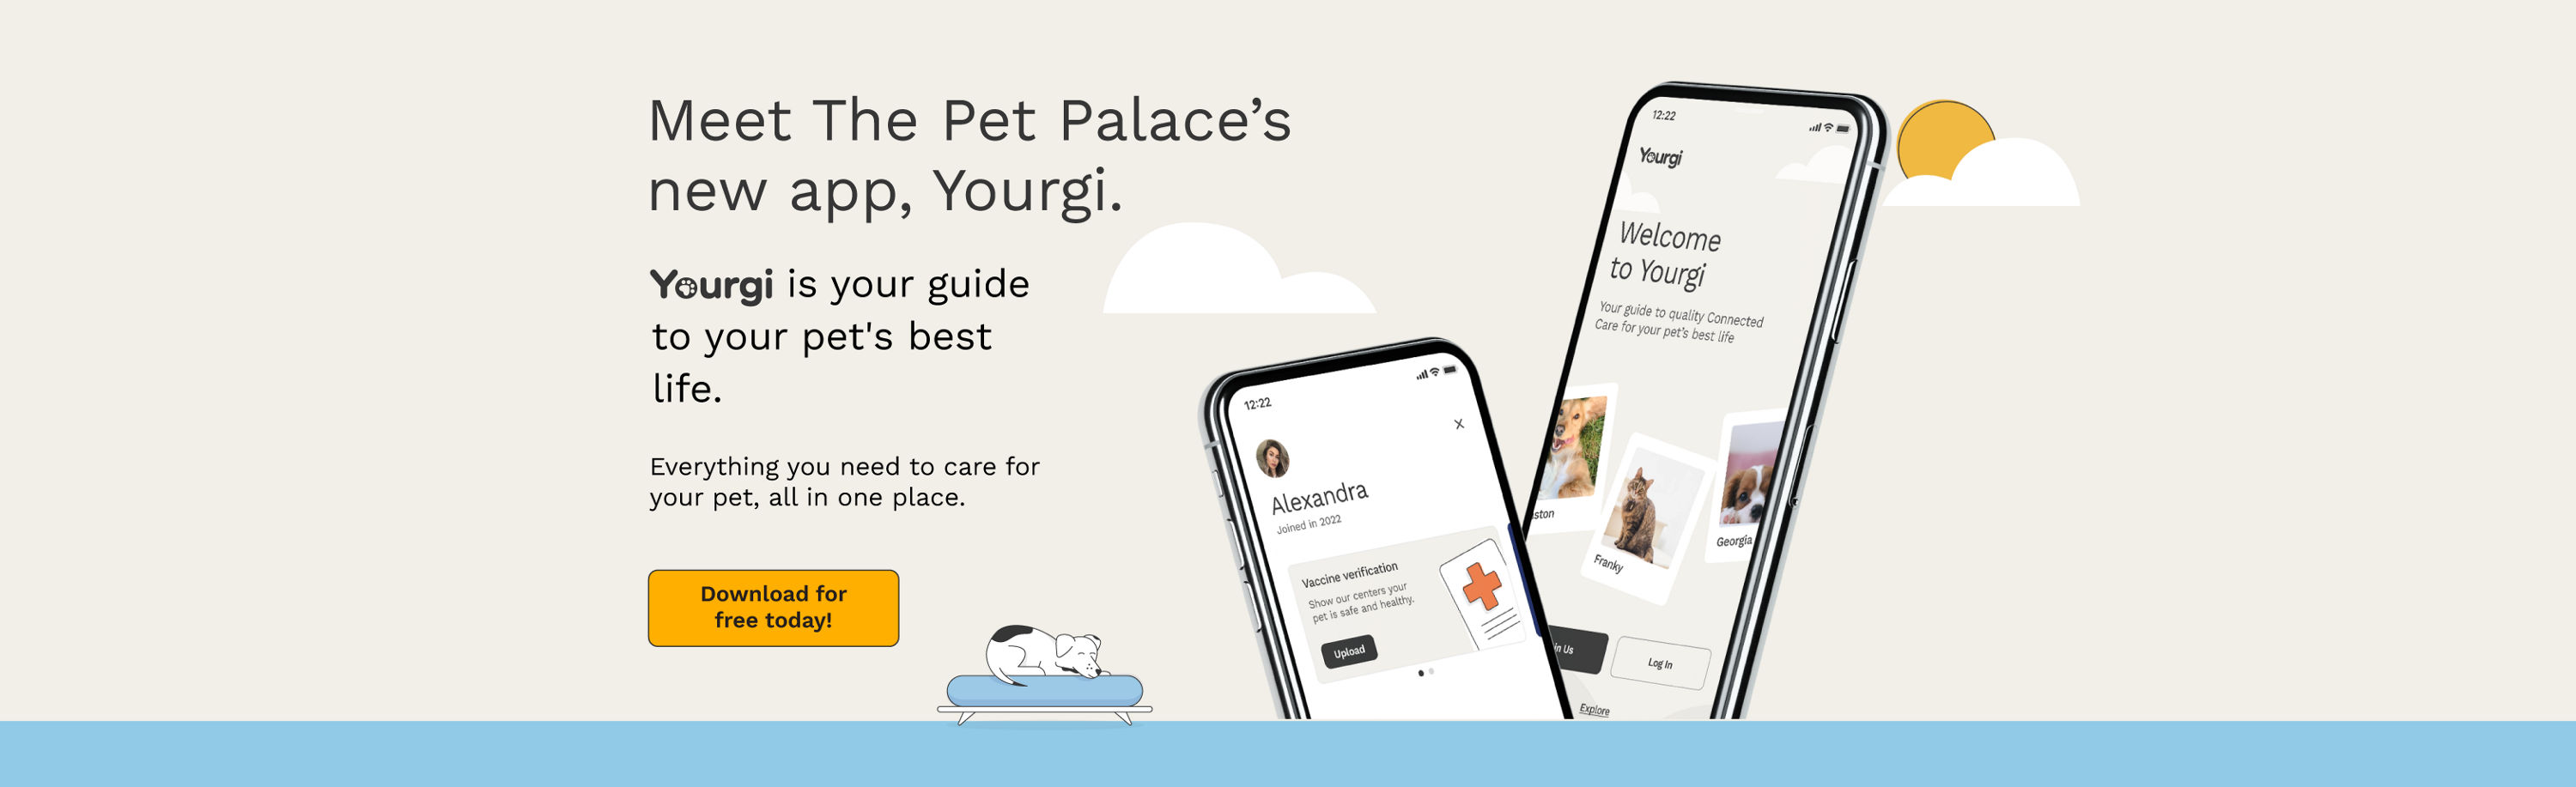 Meet the Pet Palace's new app, Yourgi.